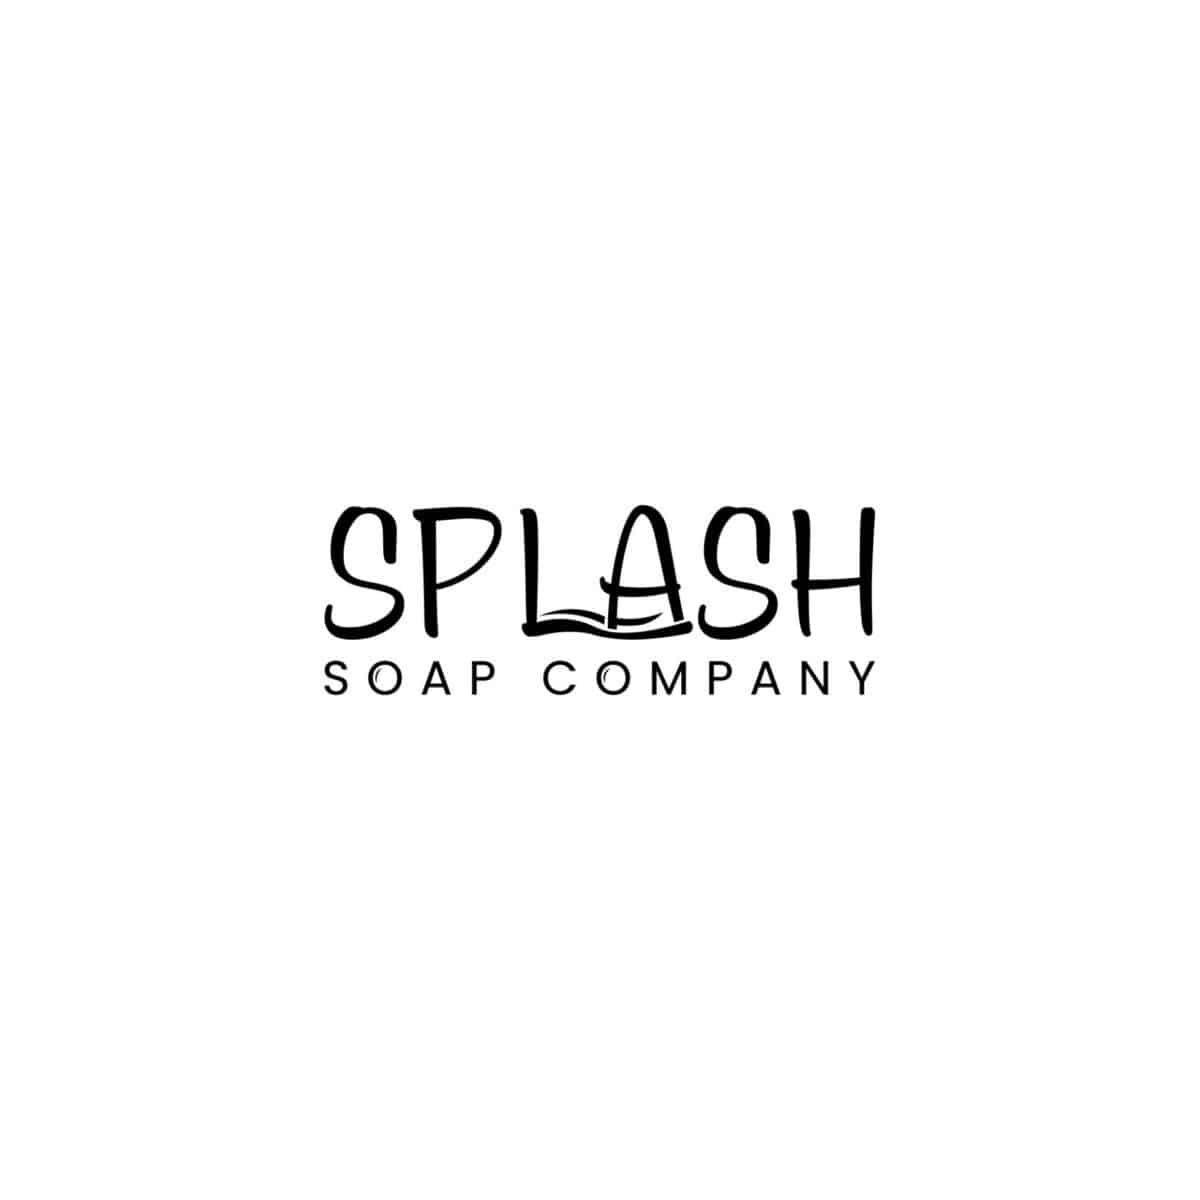 Logo of Splash Soap Company featuring the company name in stylized black text with a wave design integrated into the letter "A" in "SPLASH".